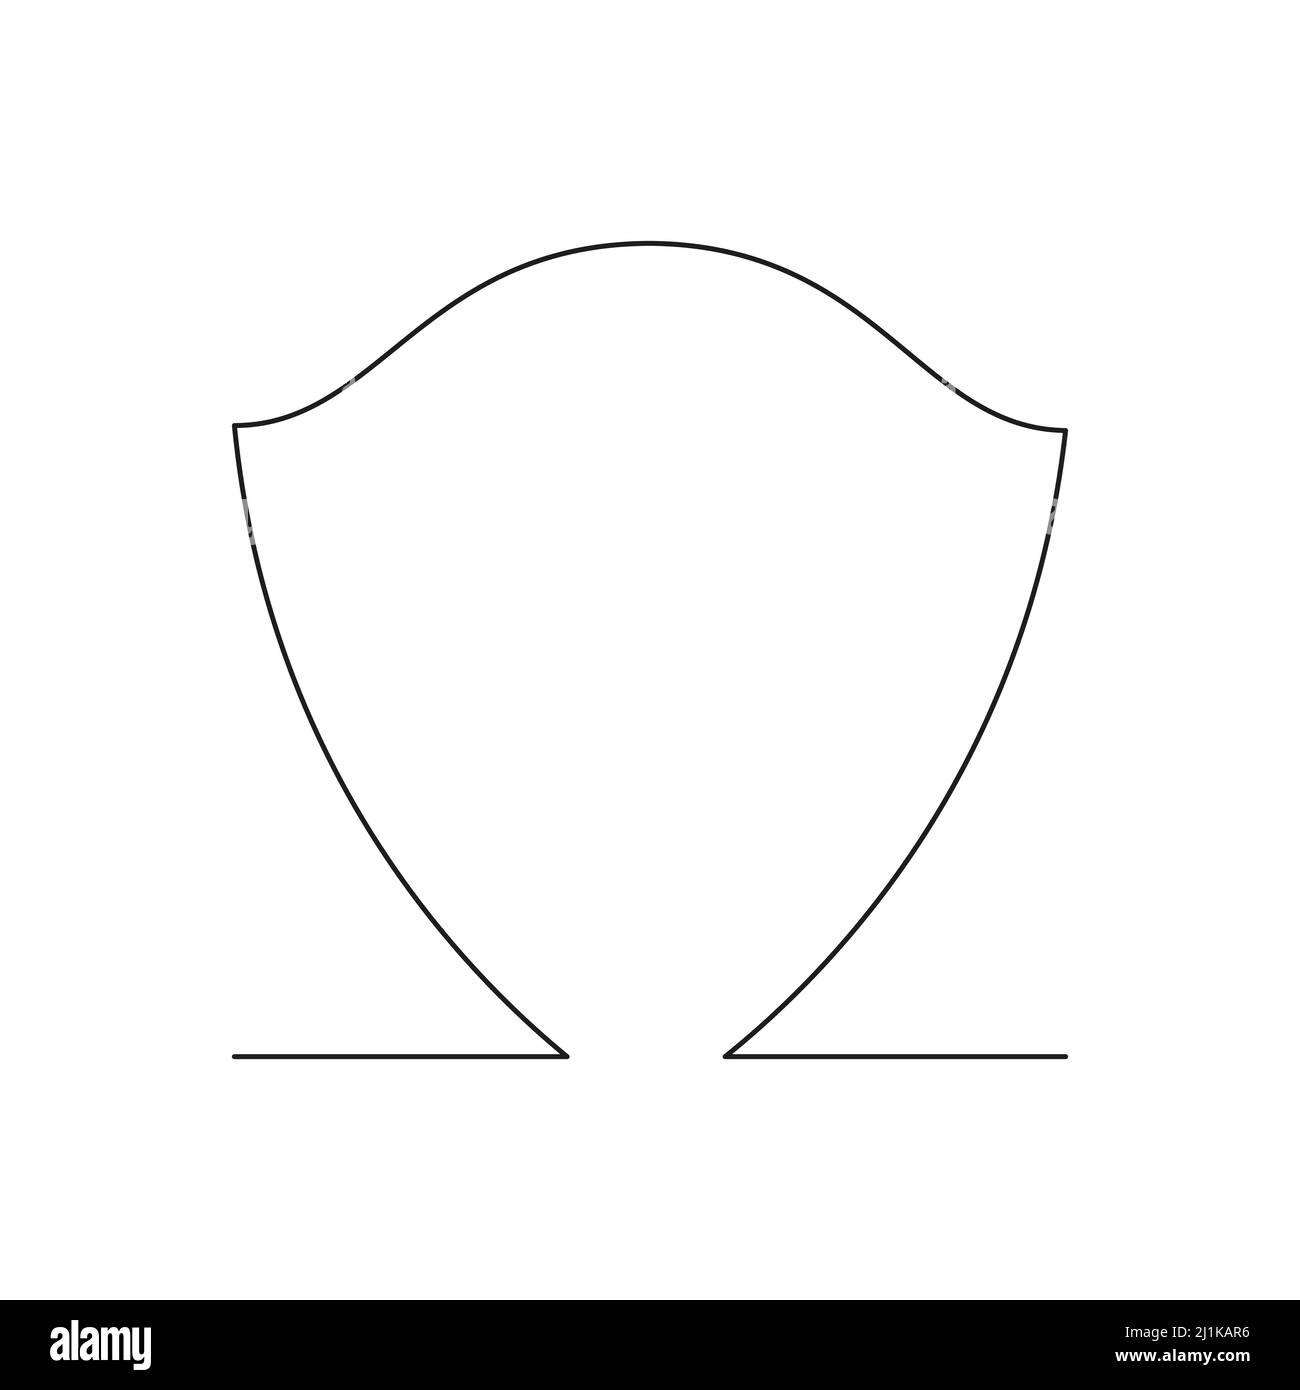 Shield continuous line sign. Protector symbol one line art. Stock Vector